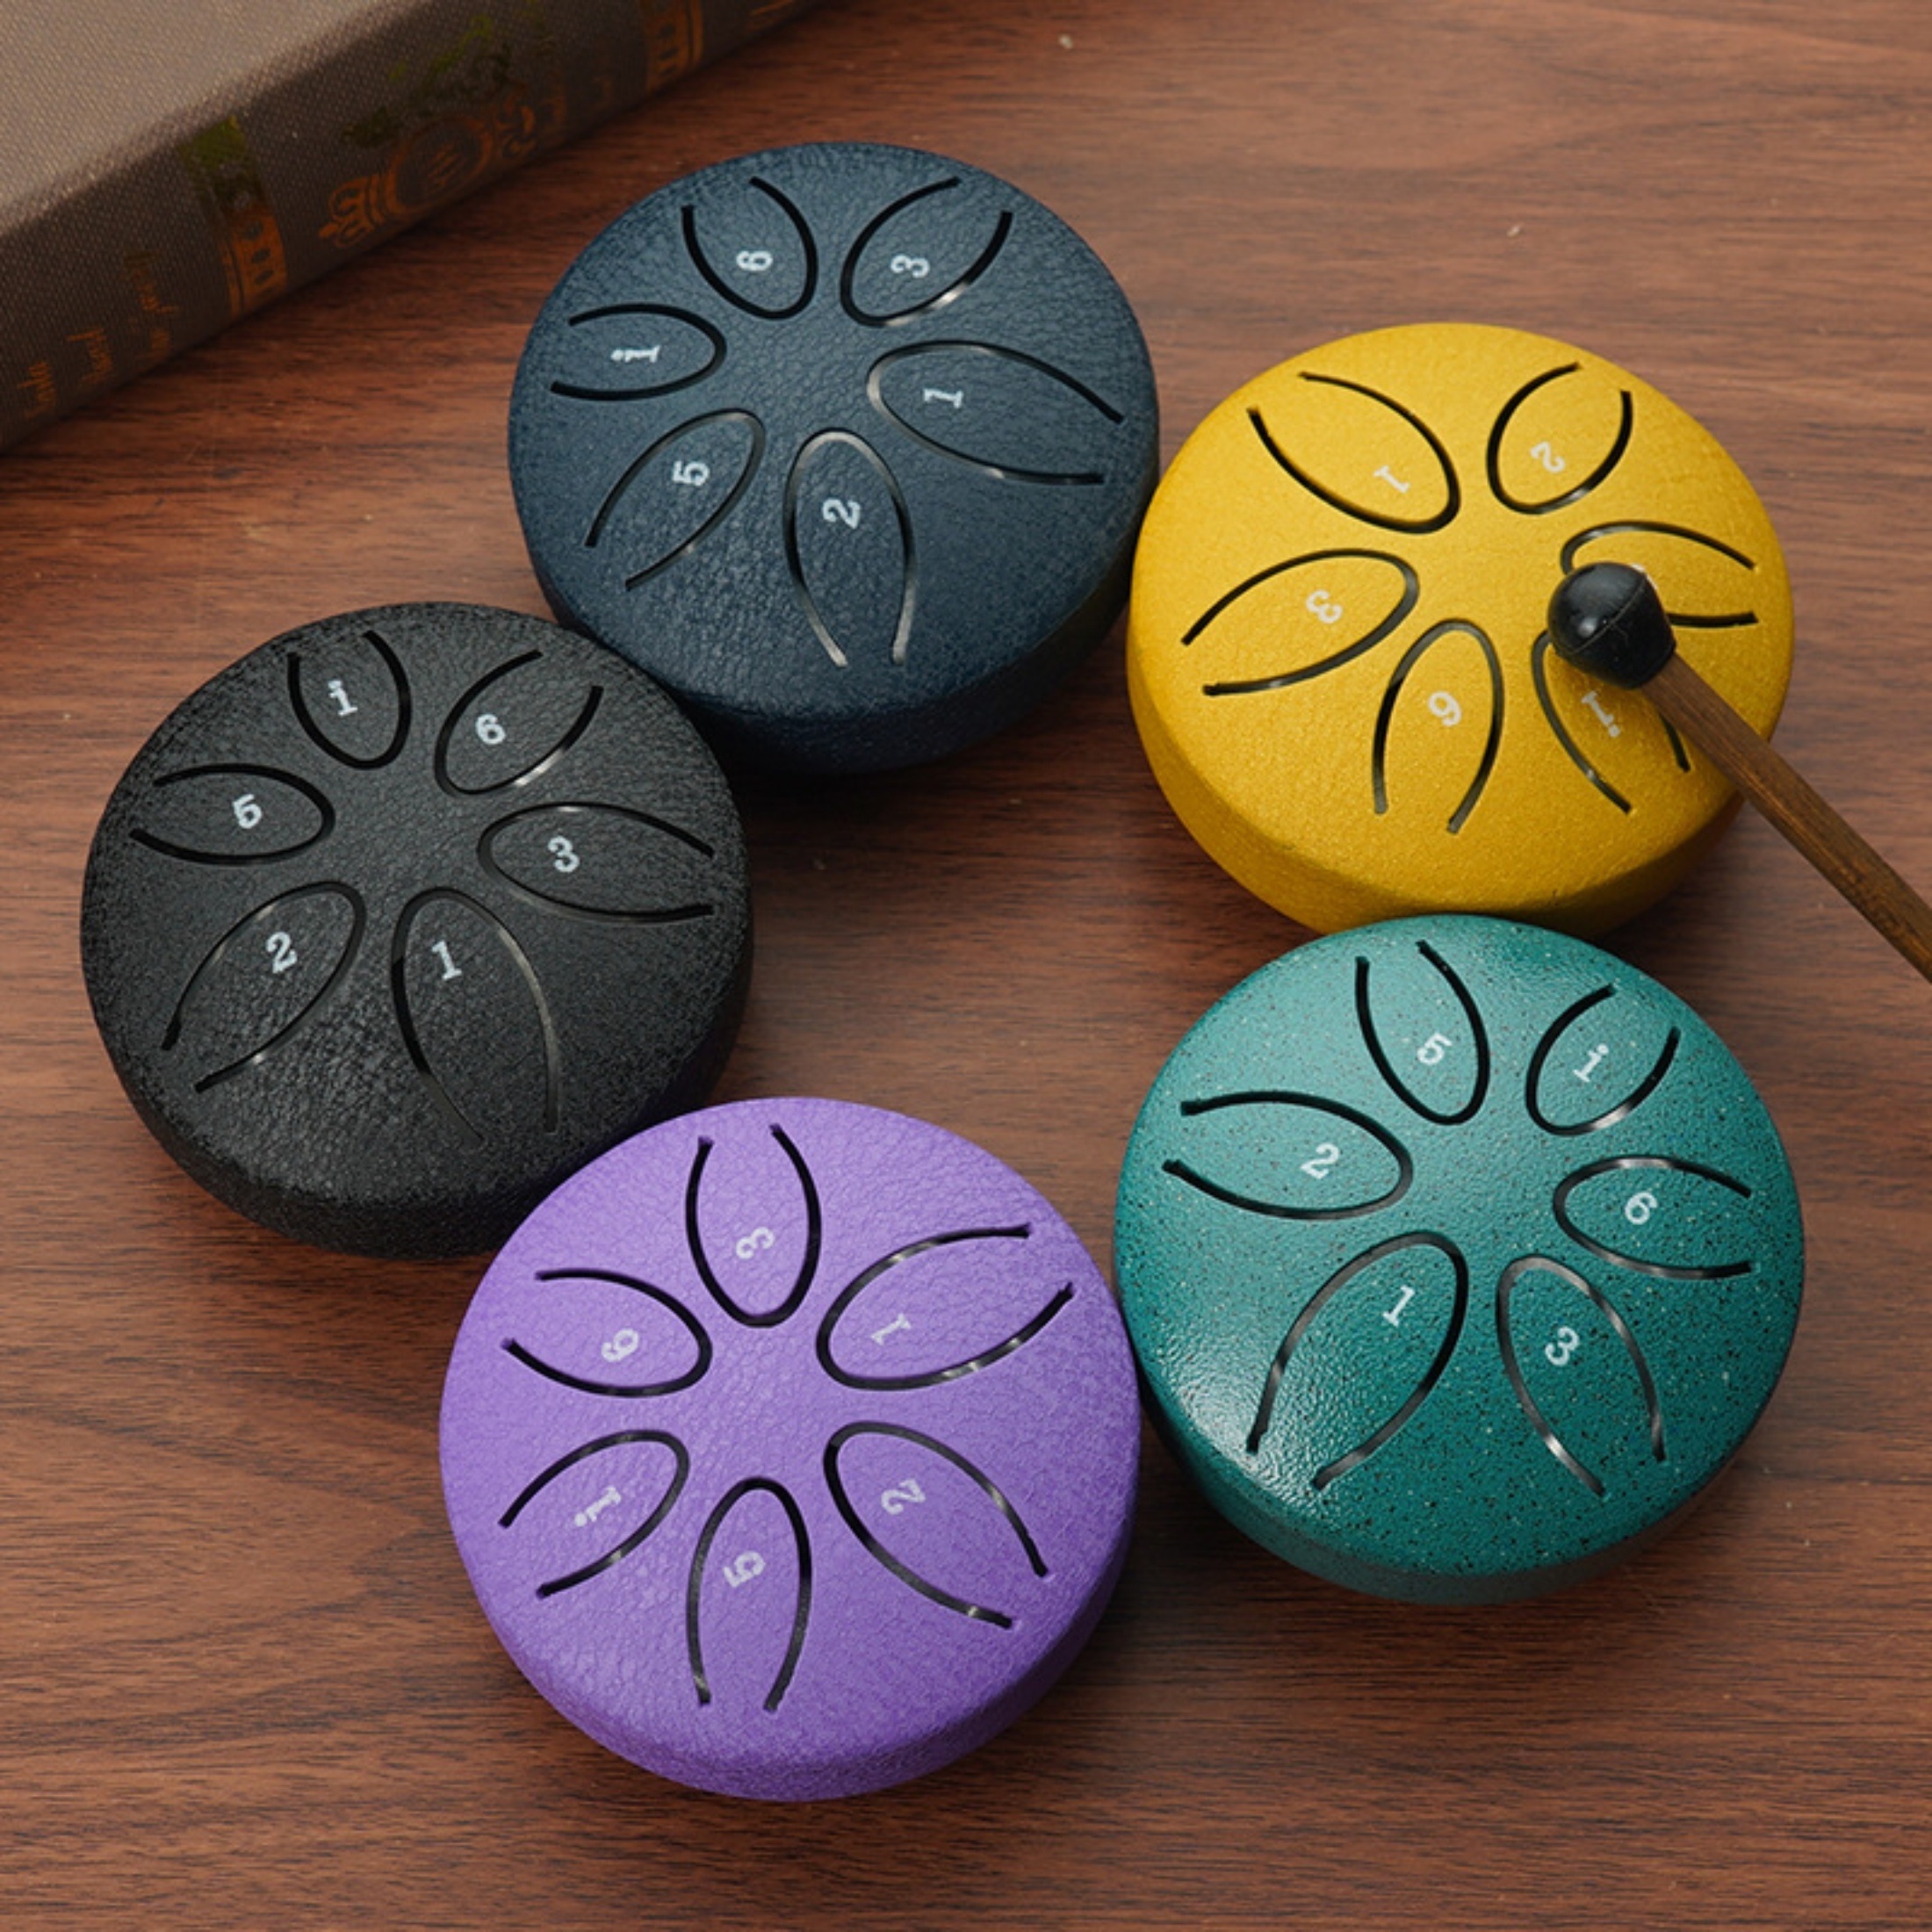 

3-inch 6-tone Ethereal Mini Steel Tongue Drum, Portable Mini Handpan Drumstick, Musical Instrument Playing